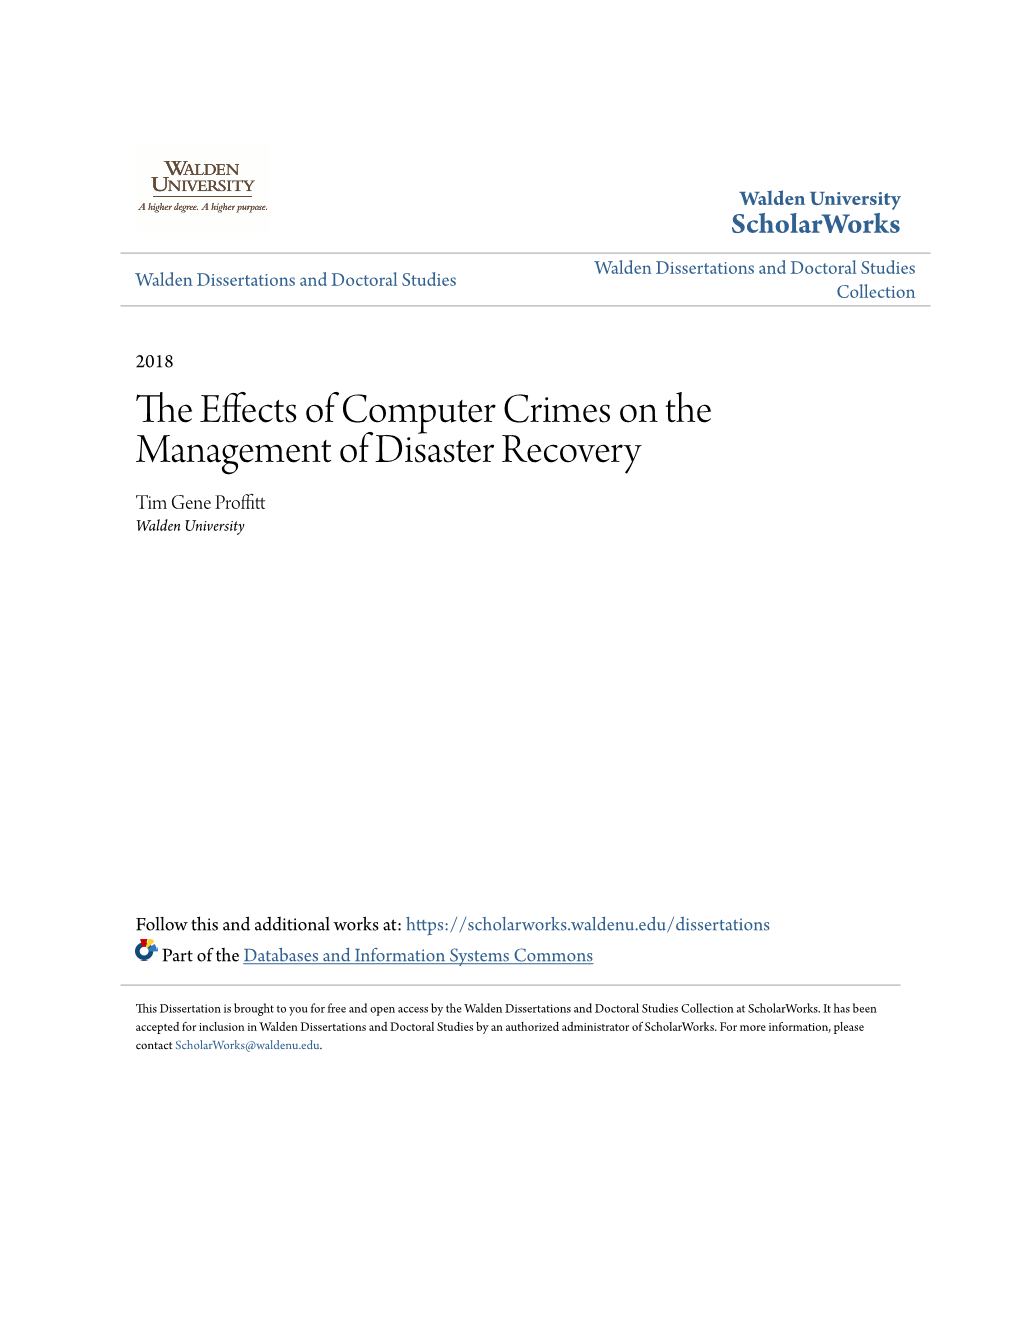 The Effects of Computer Crimes on the Management of Disaster Recovery